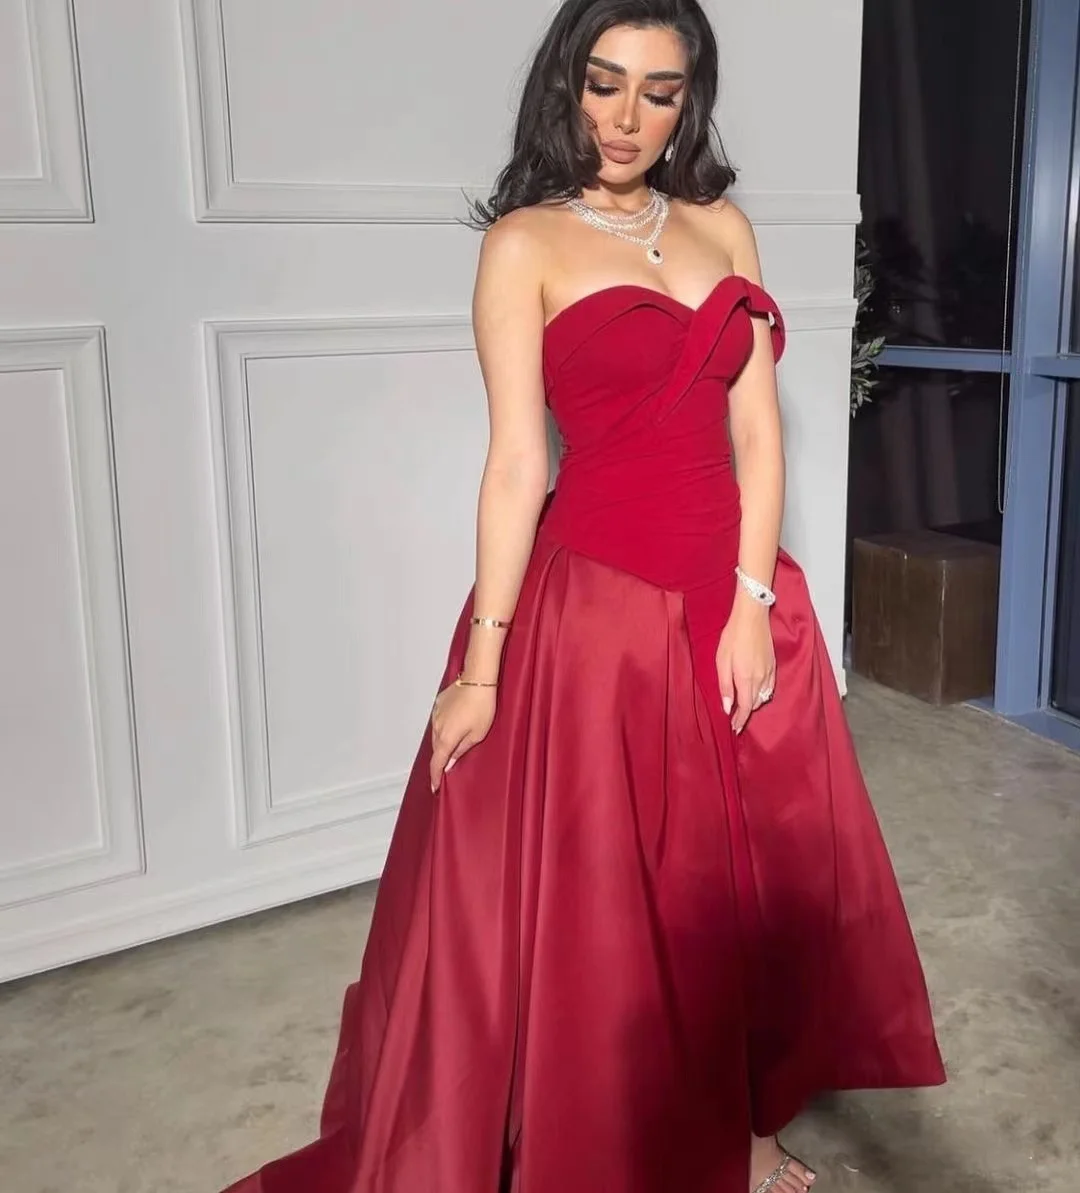 

Modern Sweetheart One Shoulder Prom Dresses Zipper Back Cocktail Party Formal Occasion Evening Gowns A Line Robe De Soiree